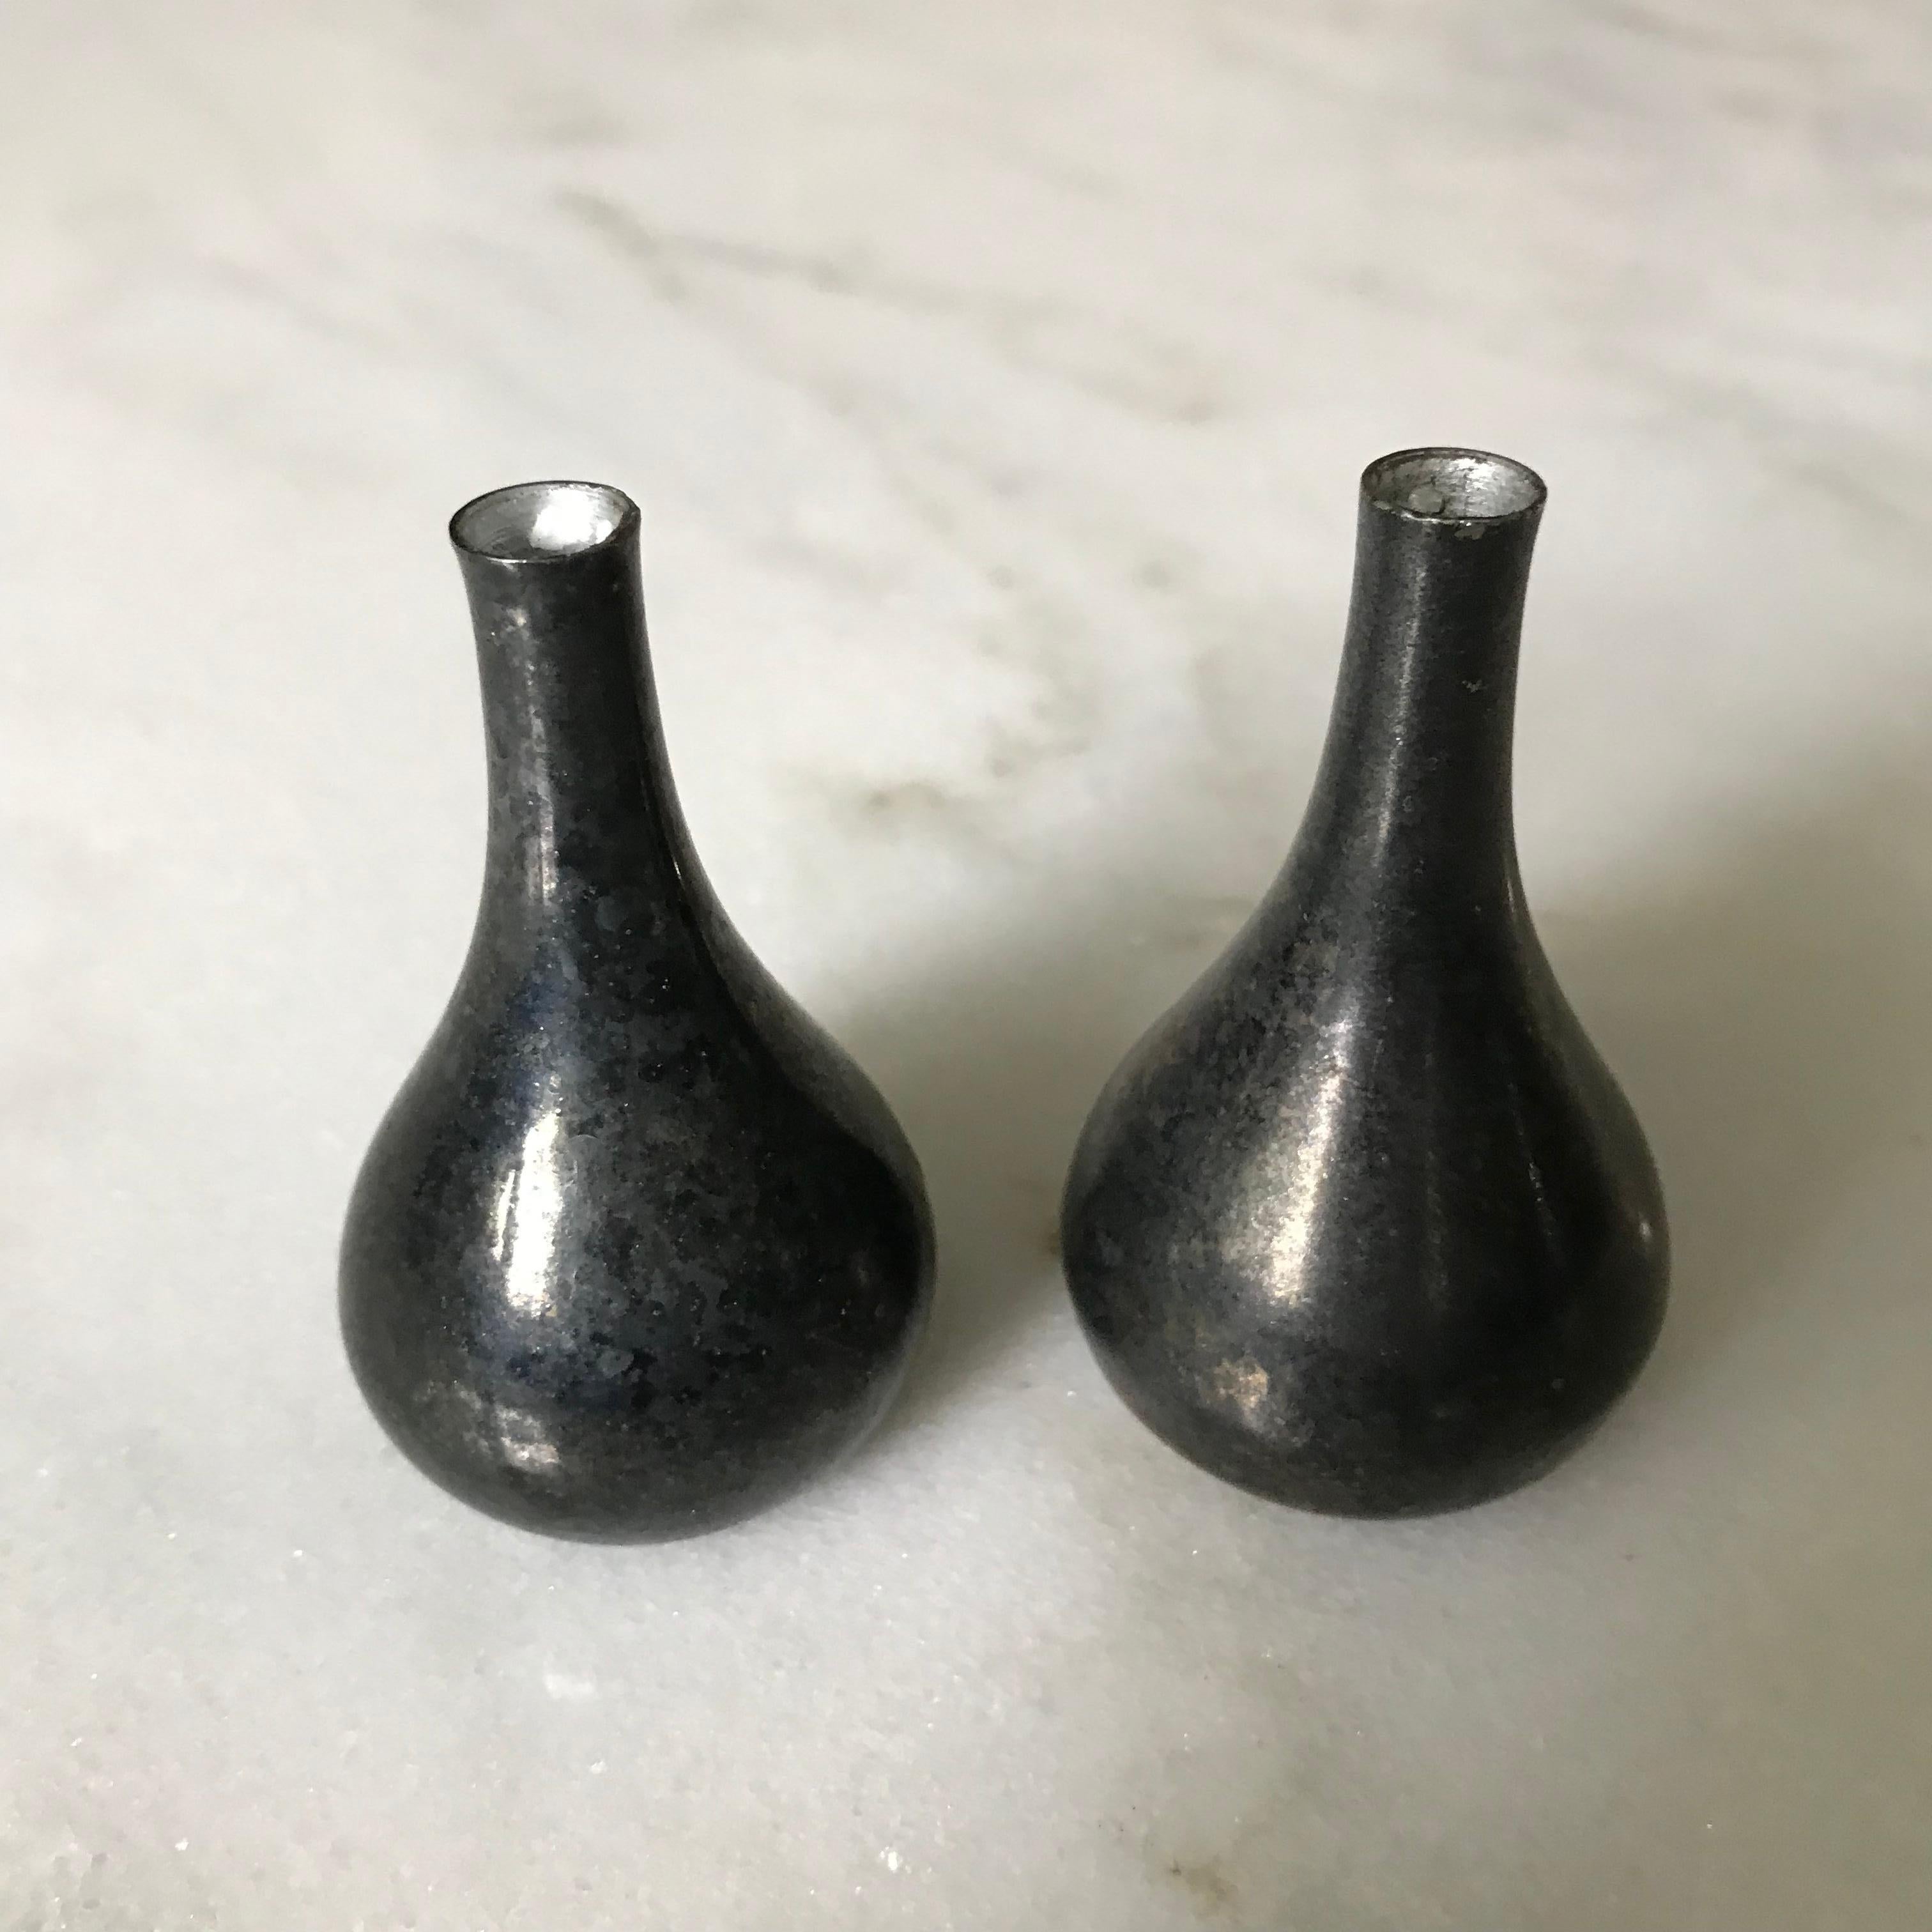 Remarkably designed Teardrop shape candleholders by Dansk Designs France IHQ. Designed to either tilt or stand straight, these Silver-plated weighted marvels are a spectacular representation of the Mid Century Modern era. Marked.